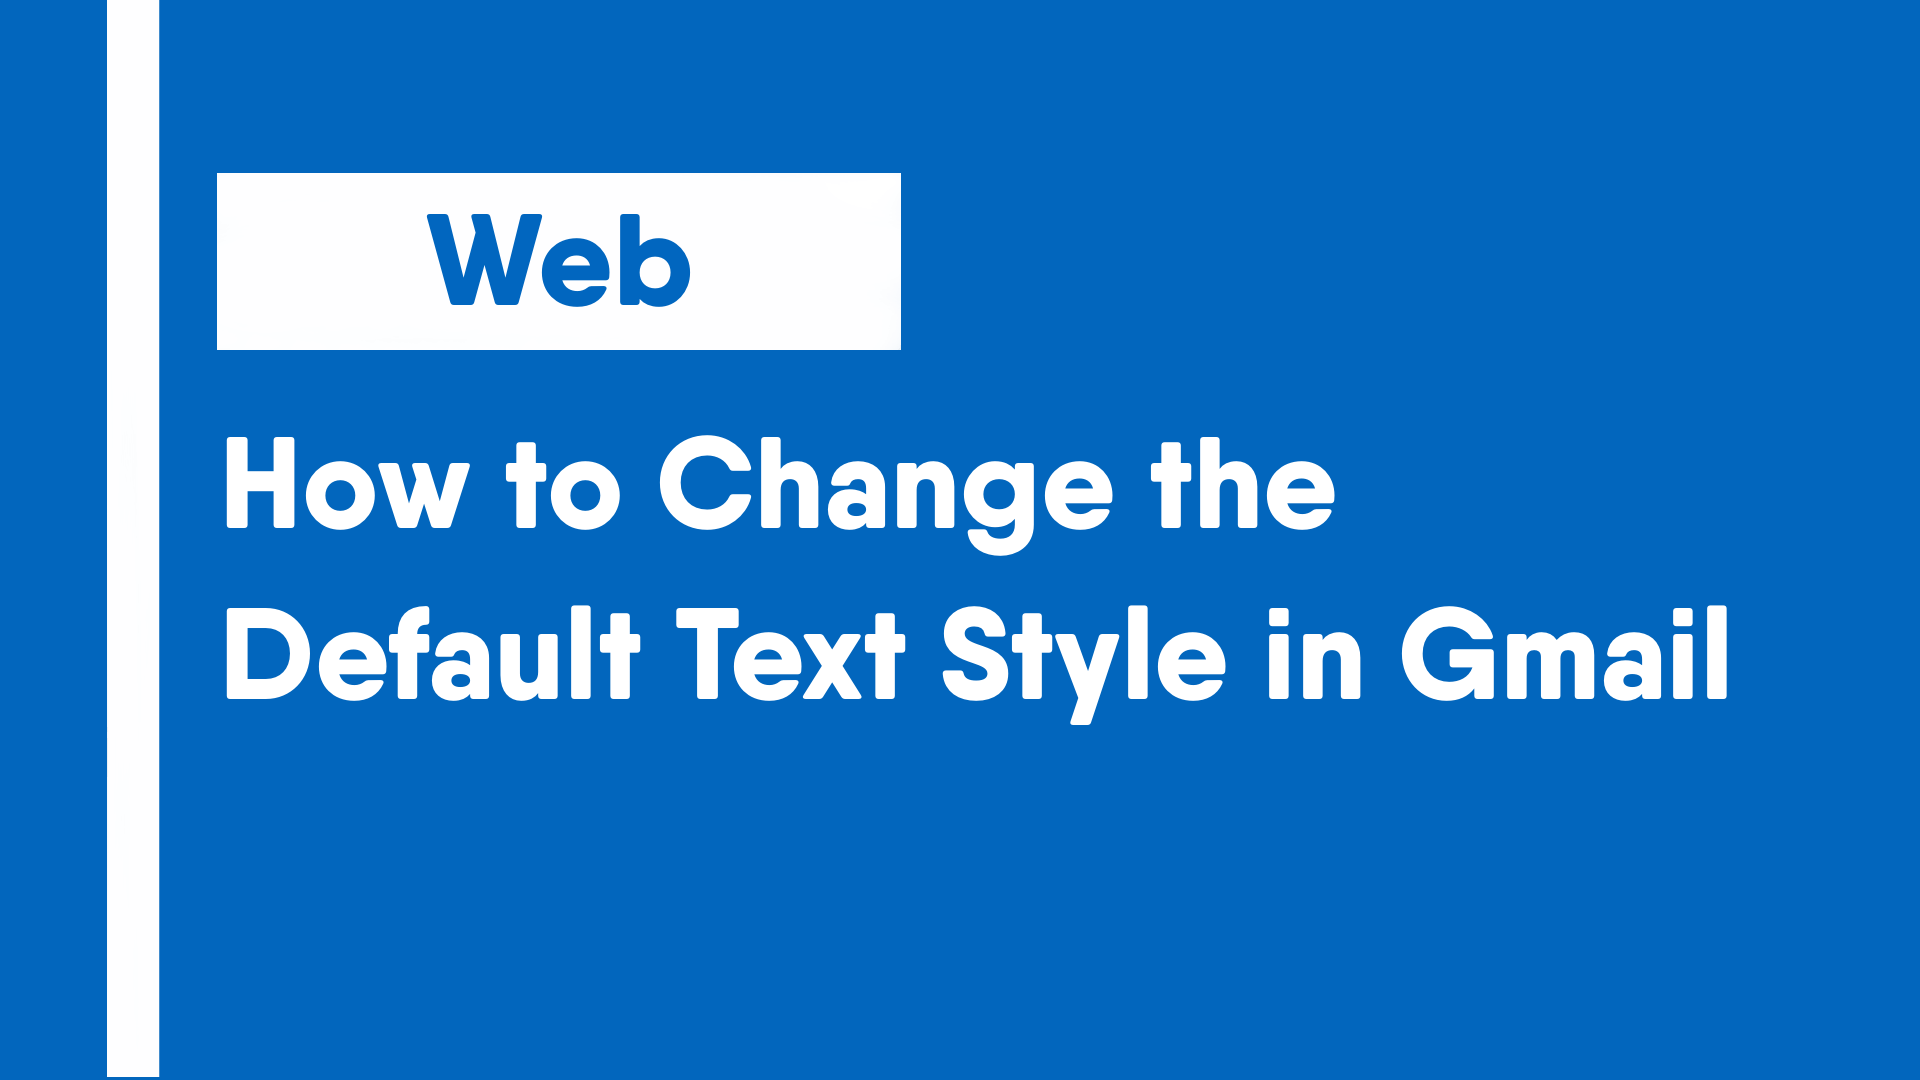 How to Change the Default Text Style in Gmail